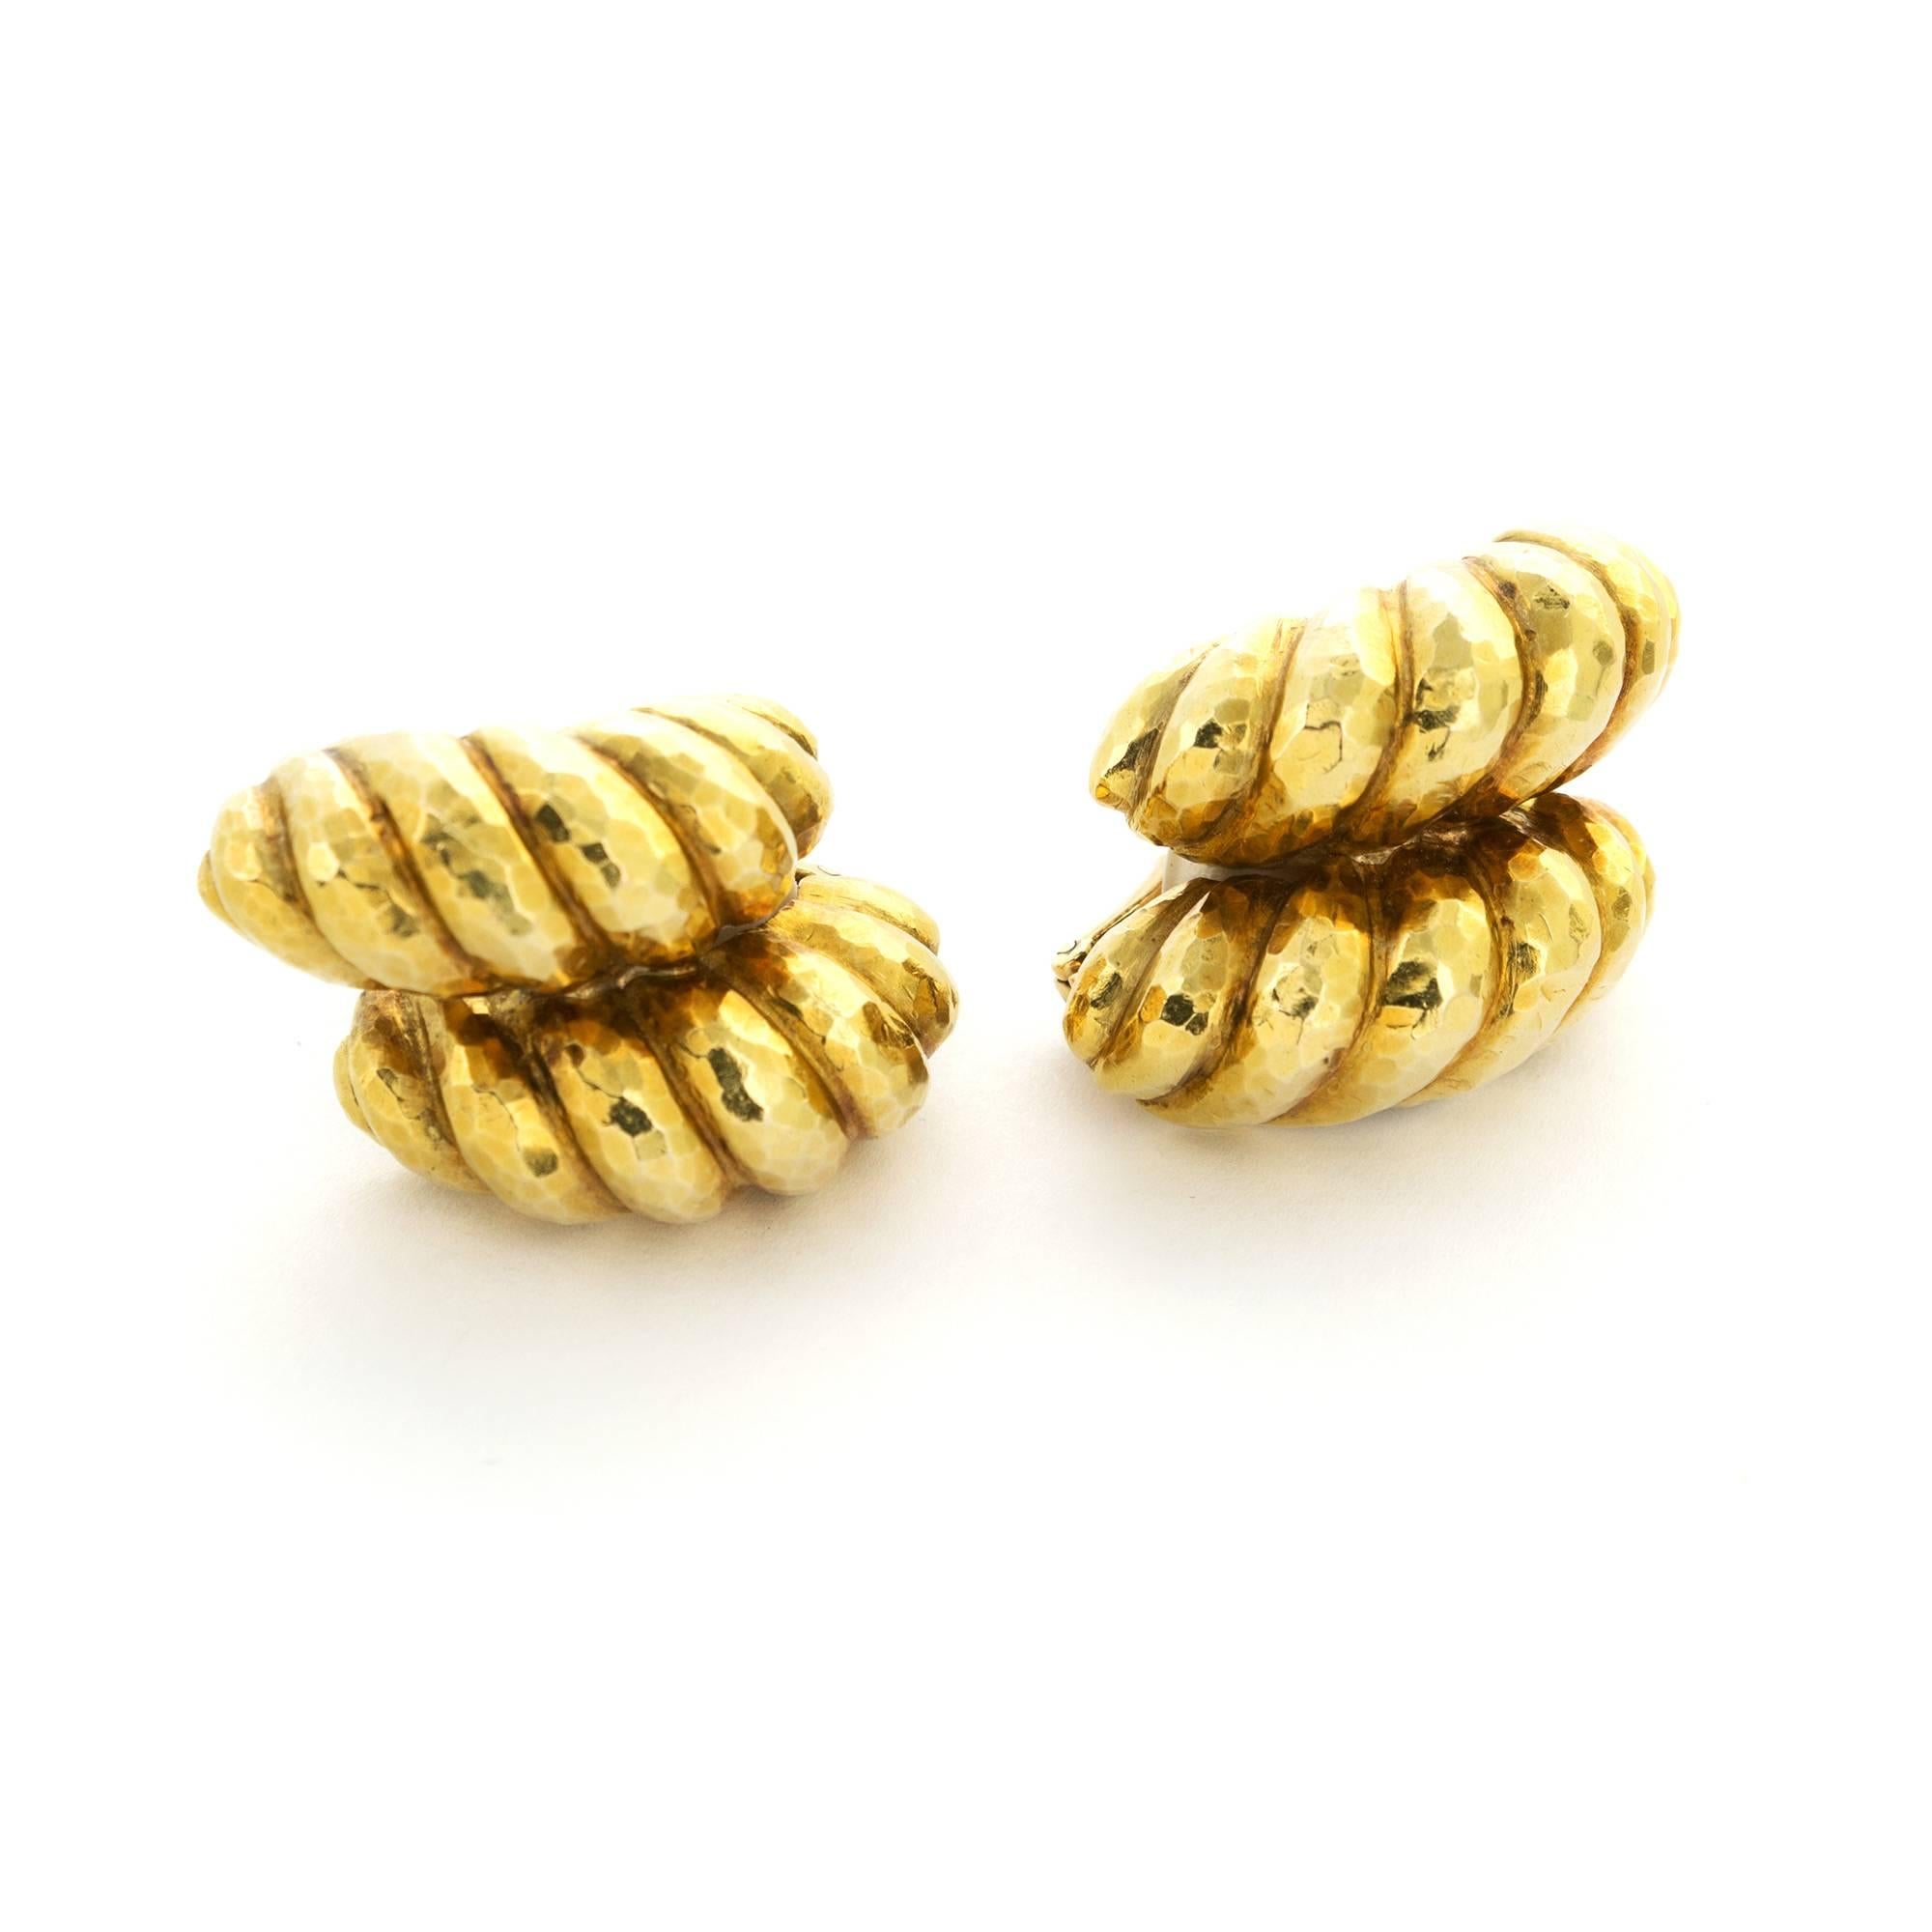 A Beautiful Pair of 18k Solid Yellow Gold Earrings by David Webb. Circa 1970's. Signed "WEBB" "18k". 